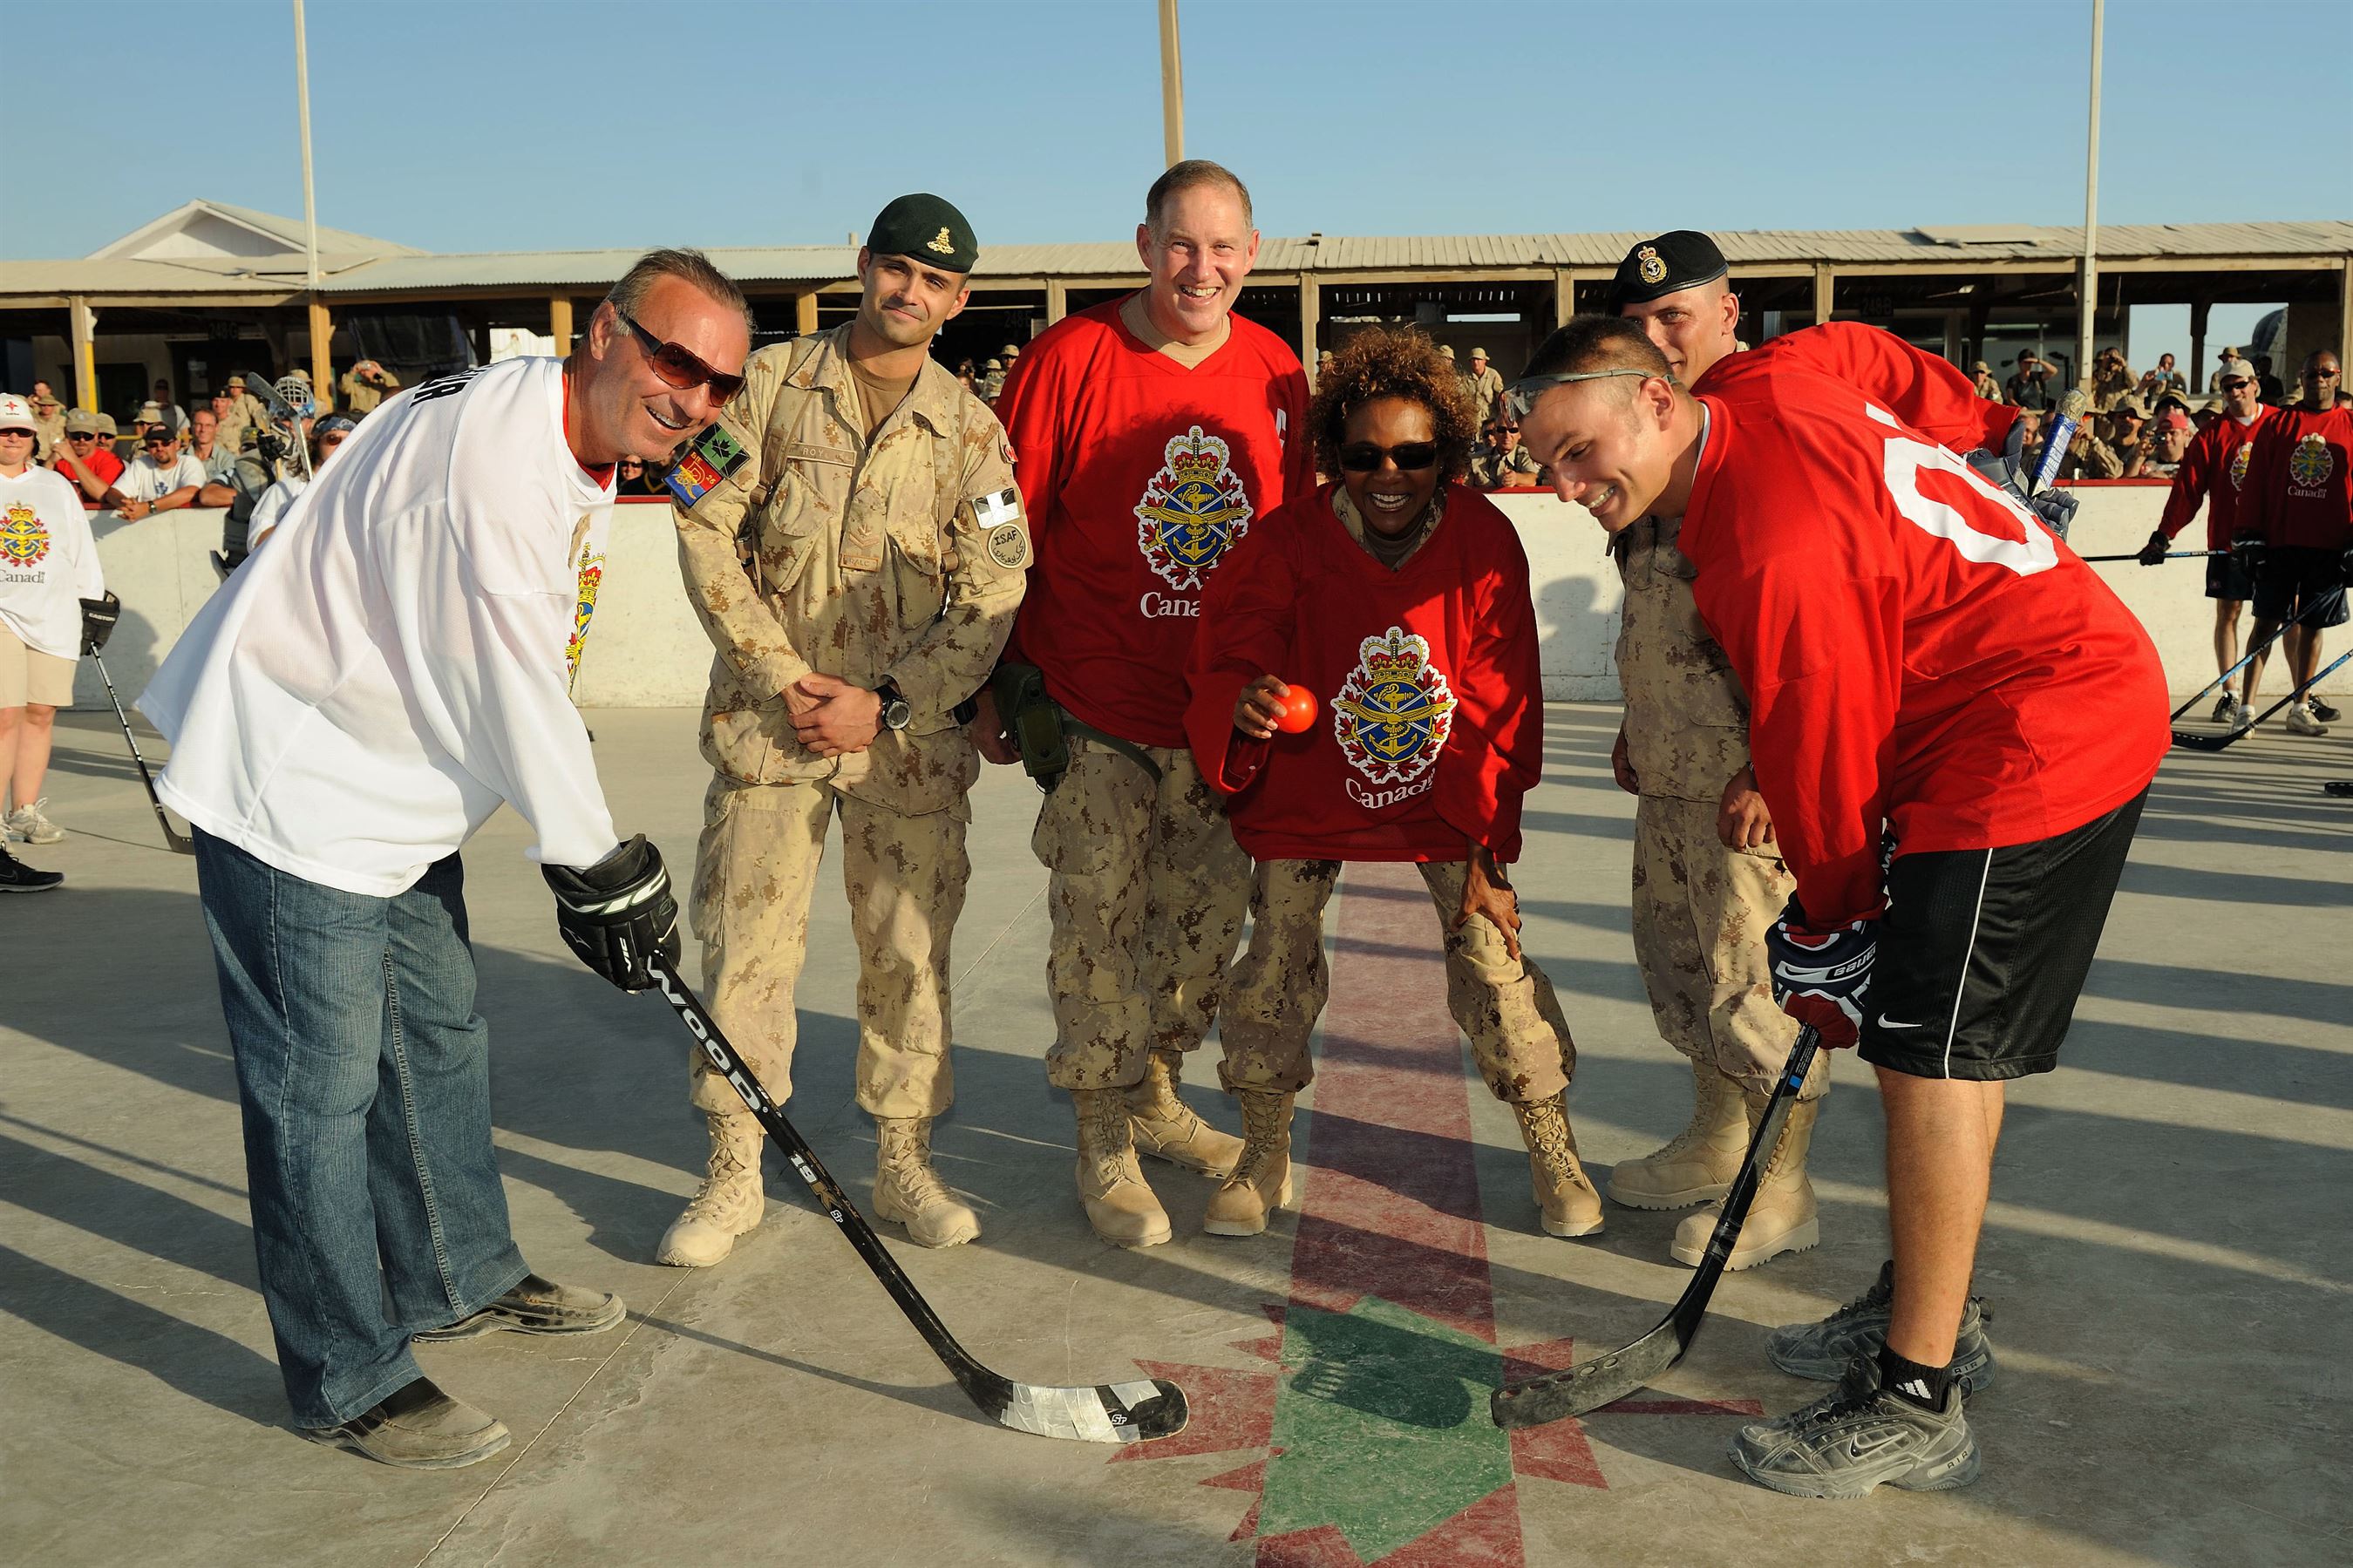 Face-off of the Team Canada ball hockey game in Afghanistan